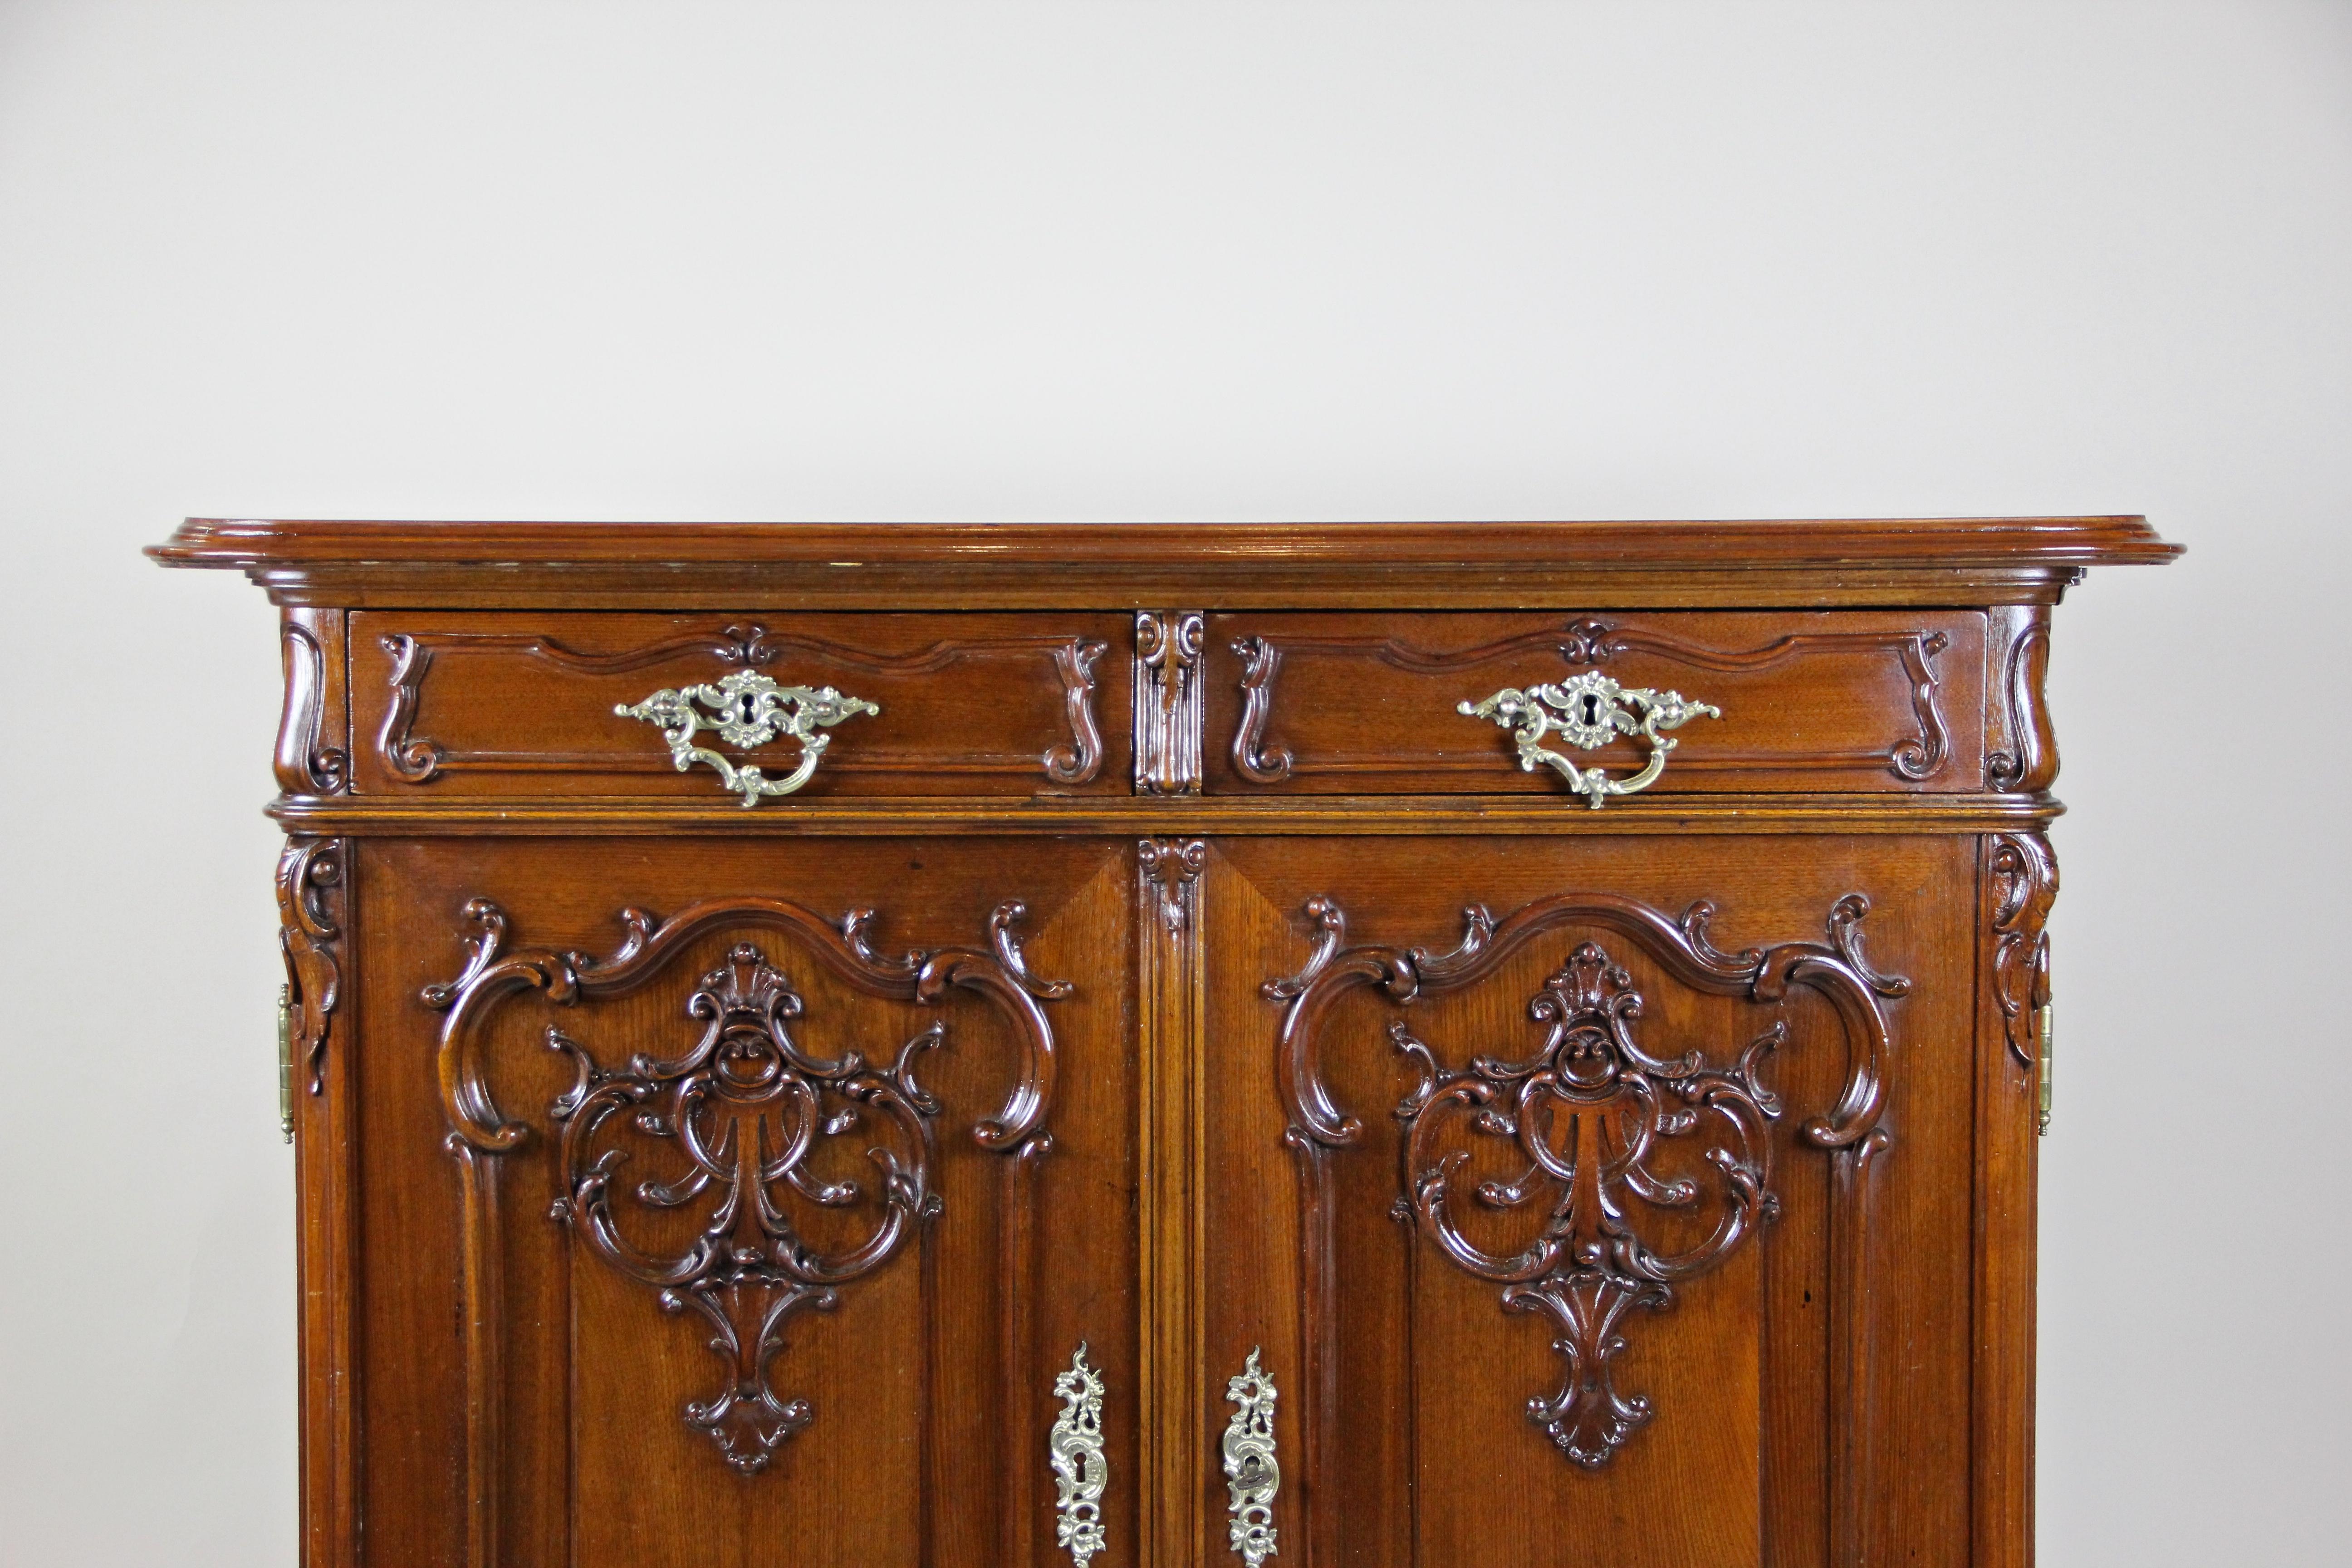 Austrian Baroque Revival Commode or Trumeau with Nut Wood Carvings, Austria, circa 1880 For Sale